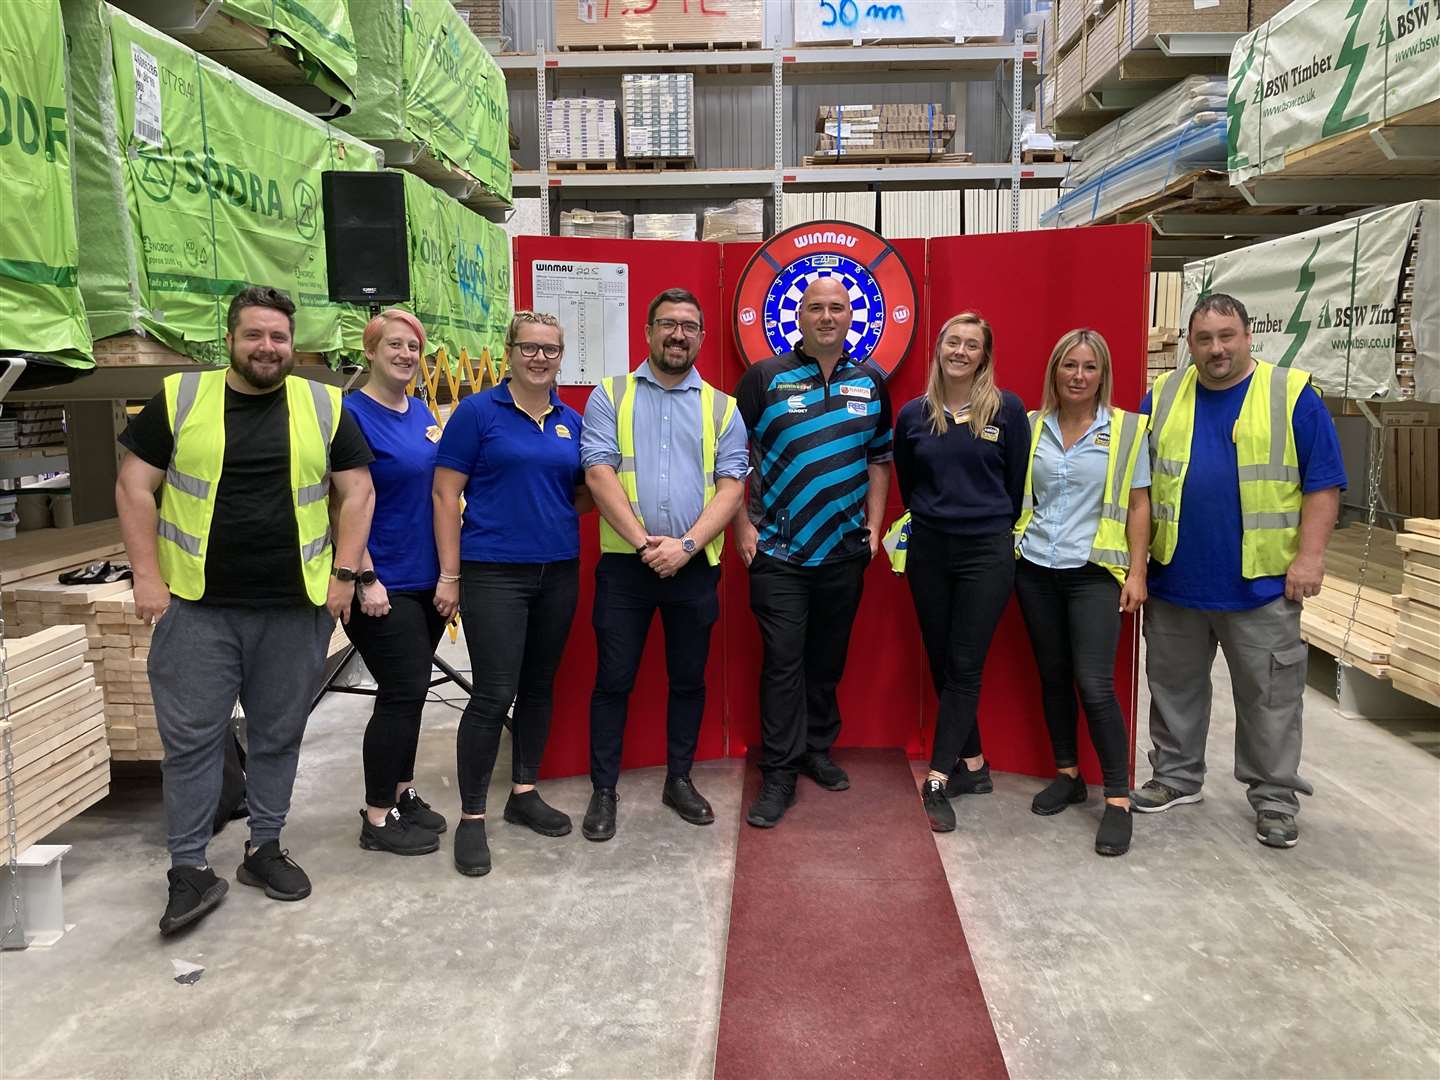 The team take a break at the Selco Builders Warehouse for a picture with champion darts player Rob Cross